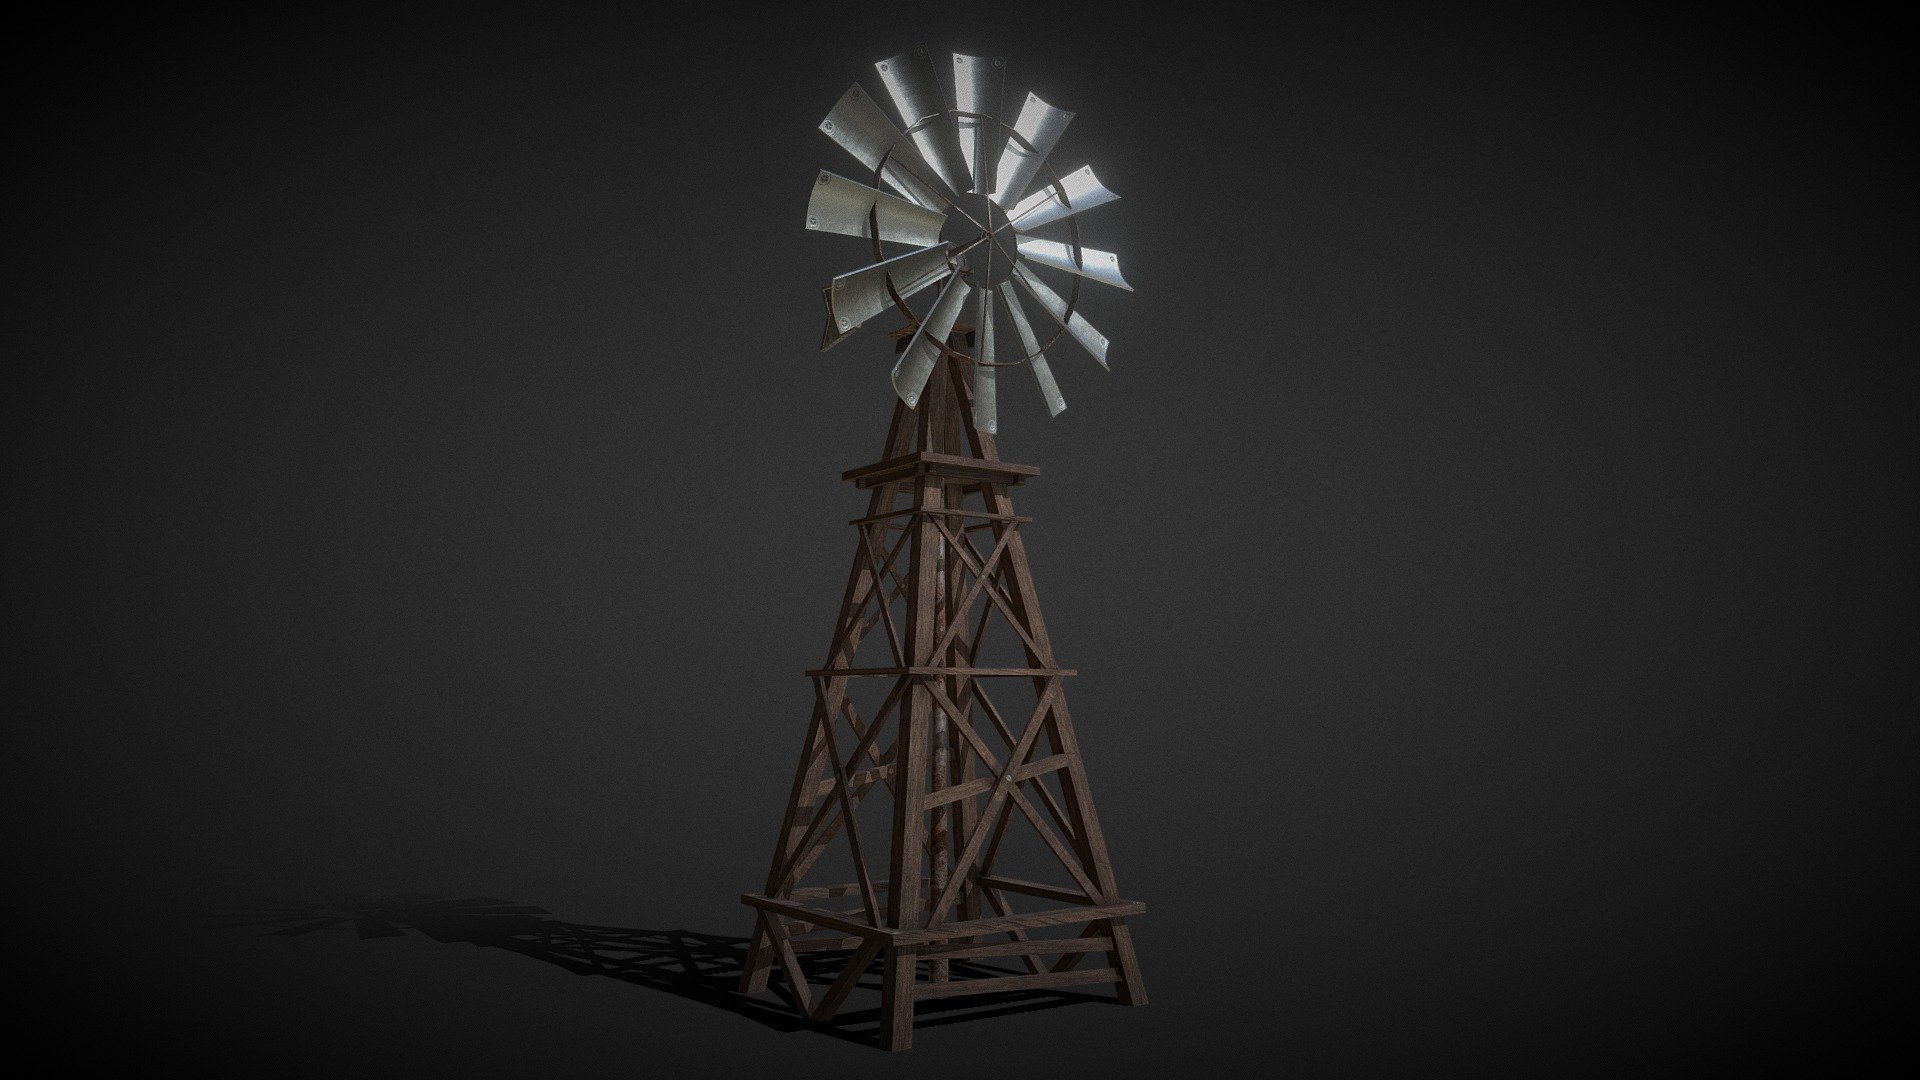 One of my models for my future project.
I will upload each of the models that will form the final enviroment 3d model